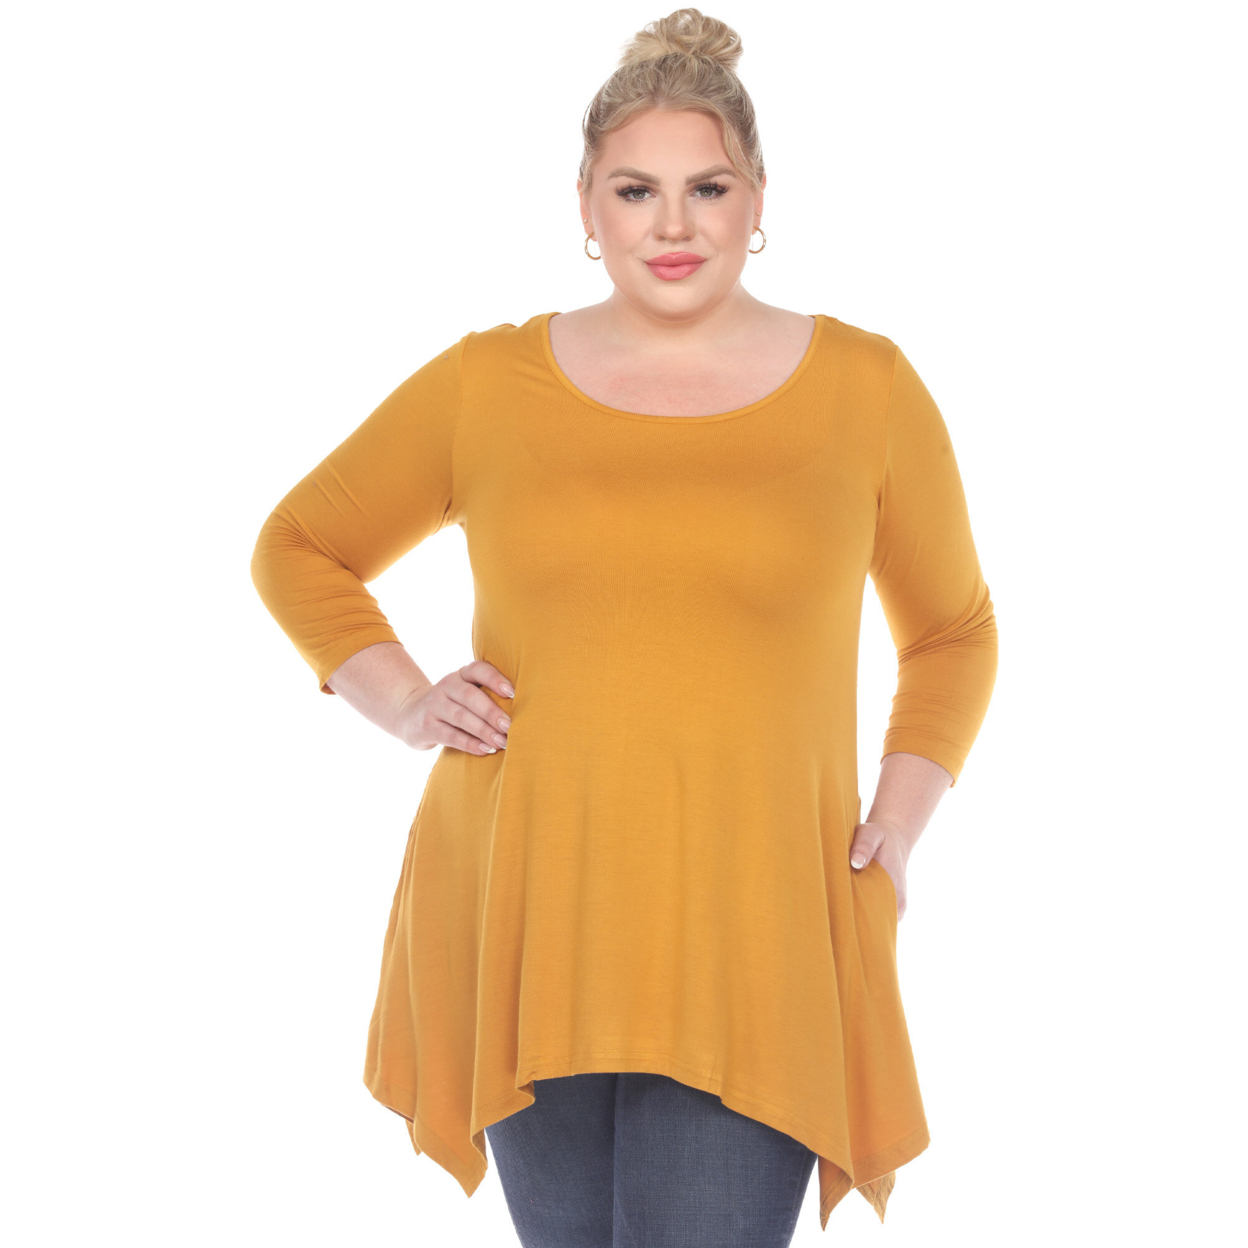 White Mark Women's Quarter Sleeve Tunic Top With Pockets - Mustard, 6X